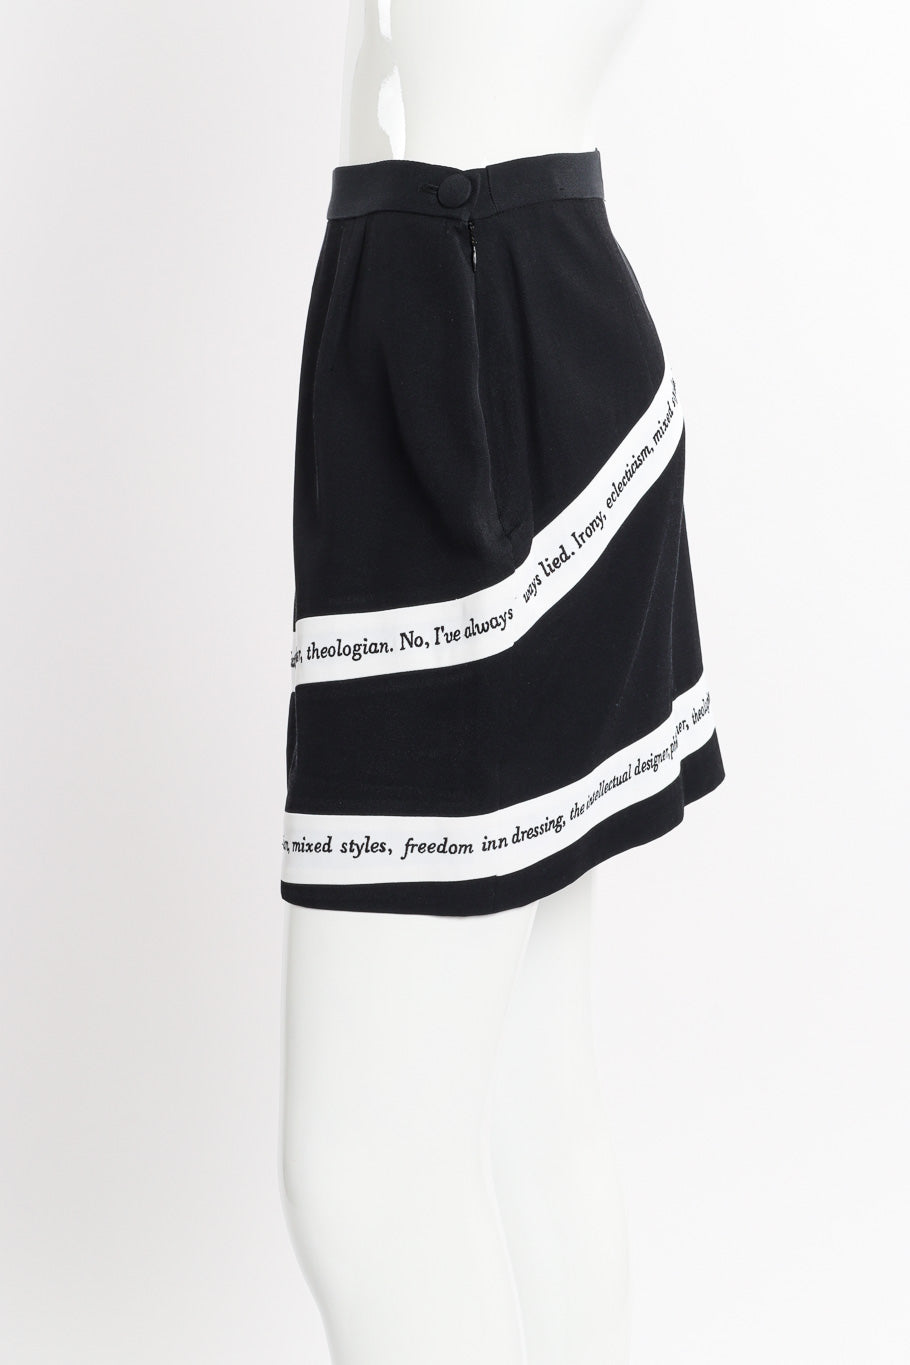 Irony of Design Text Blazer & Skirt Suit by Moschino on mannequin skirt only side @recessla